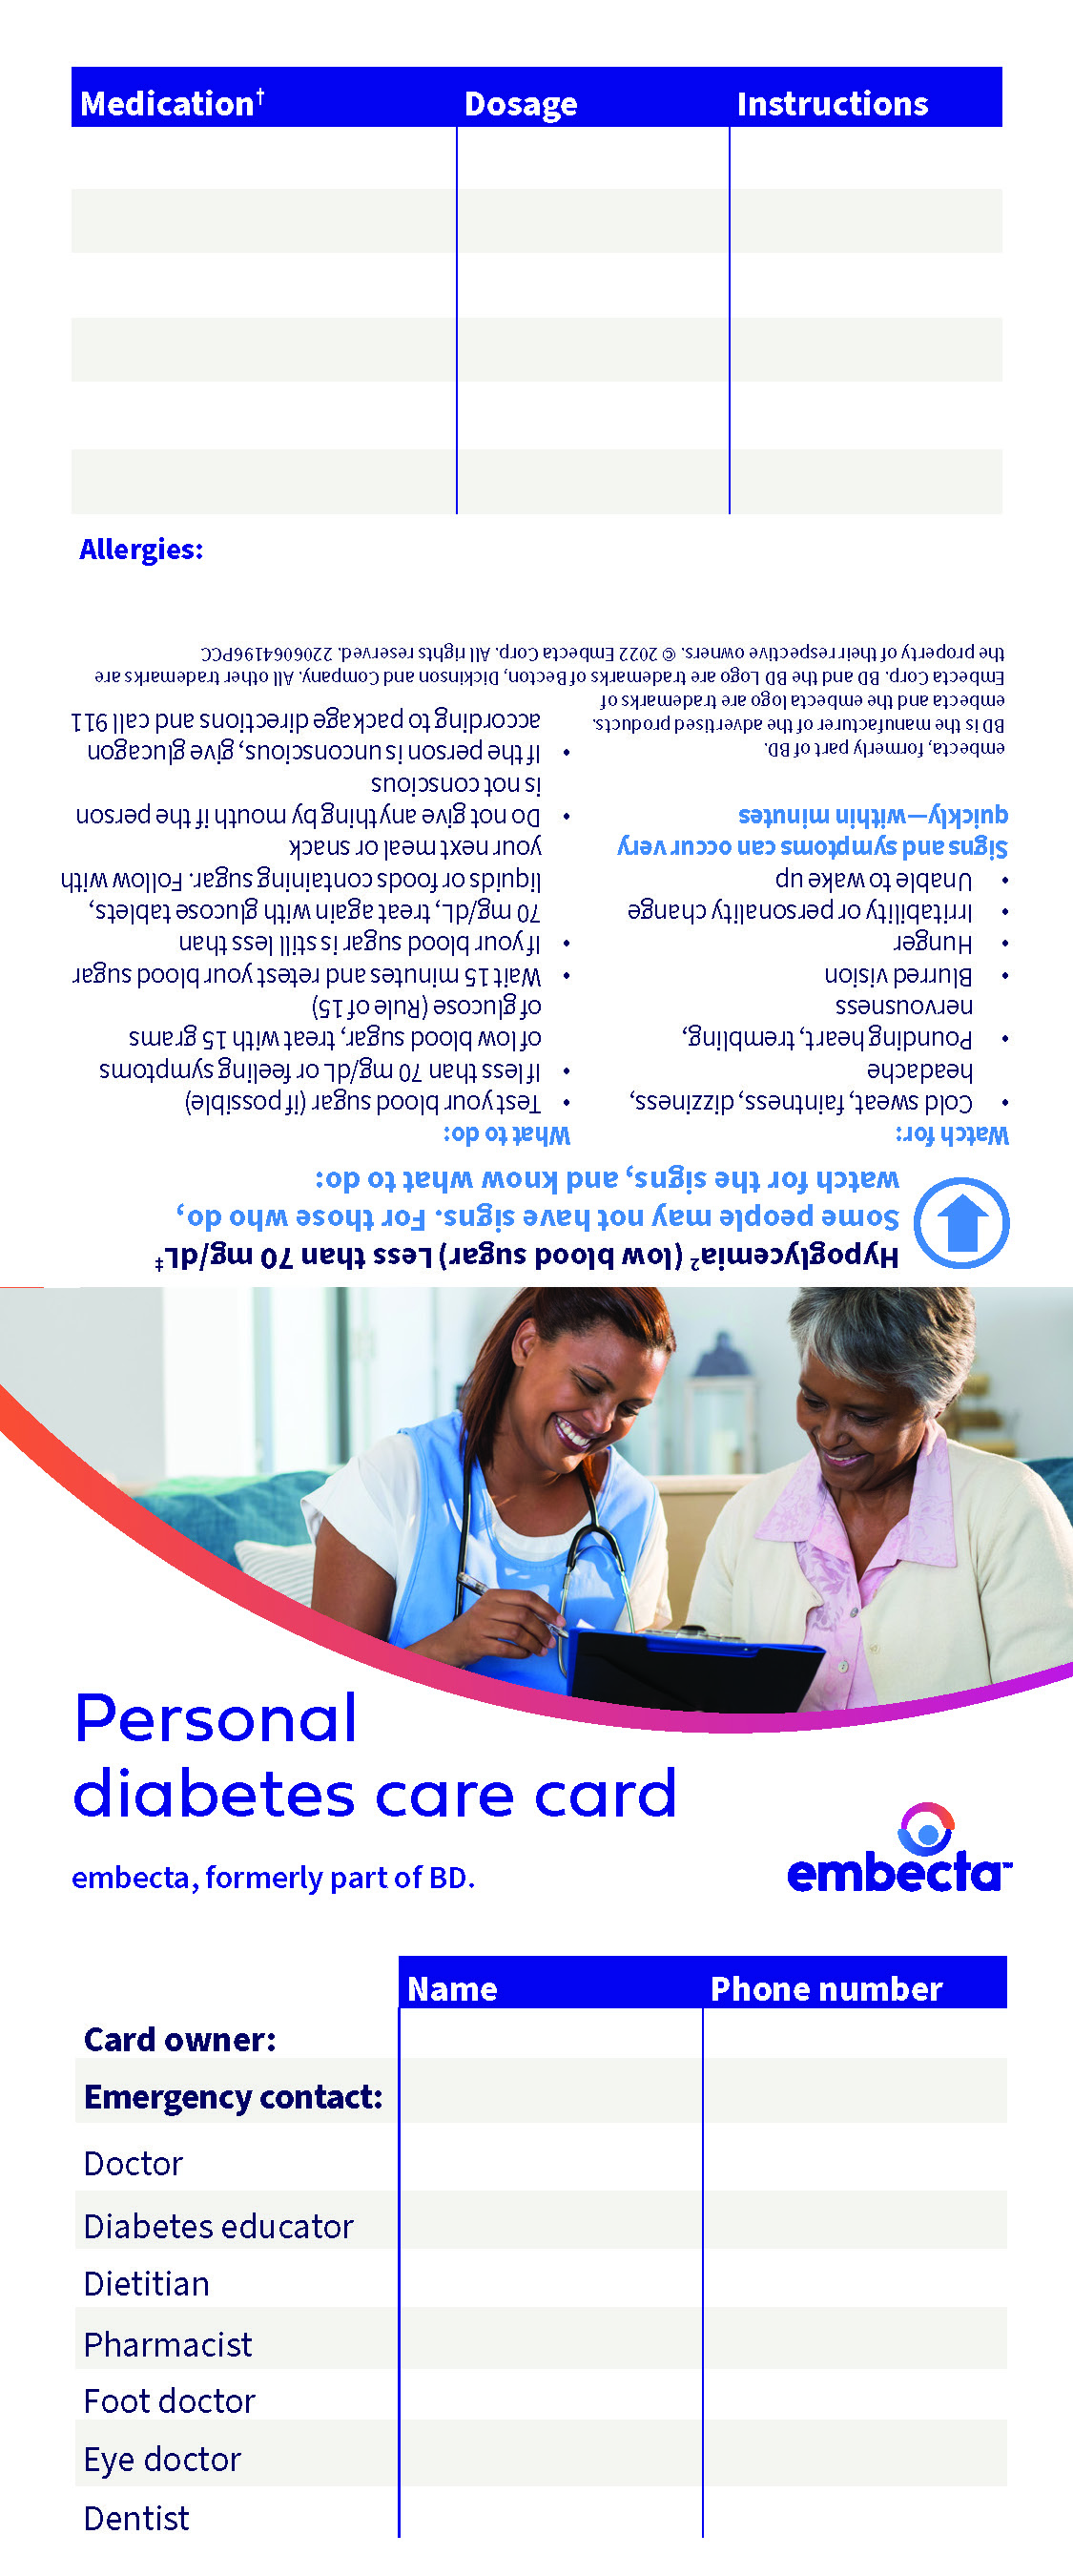 Personal Diabetes Care card